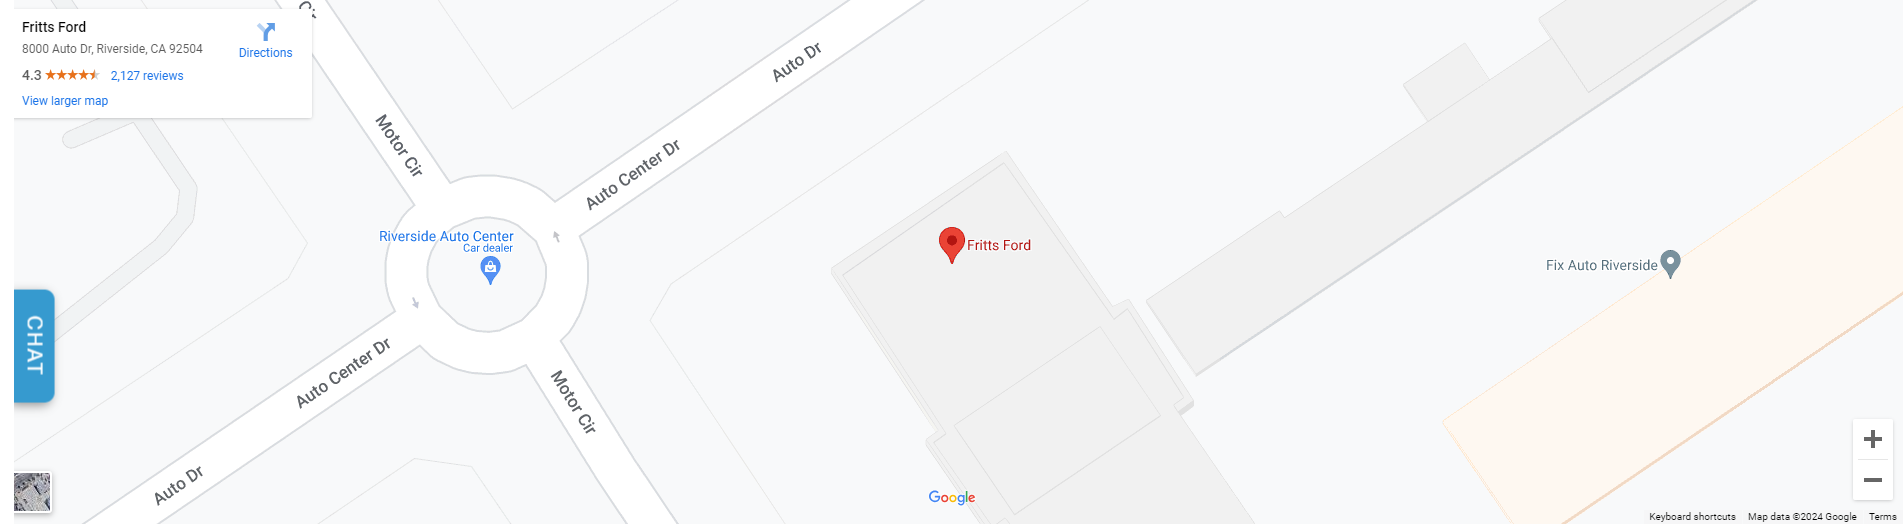 Fritts Ford Google Maps - Find Directions